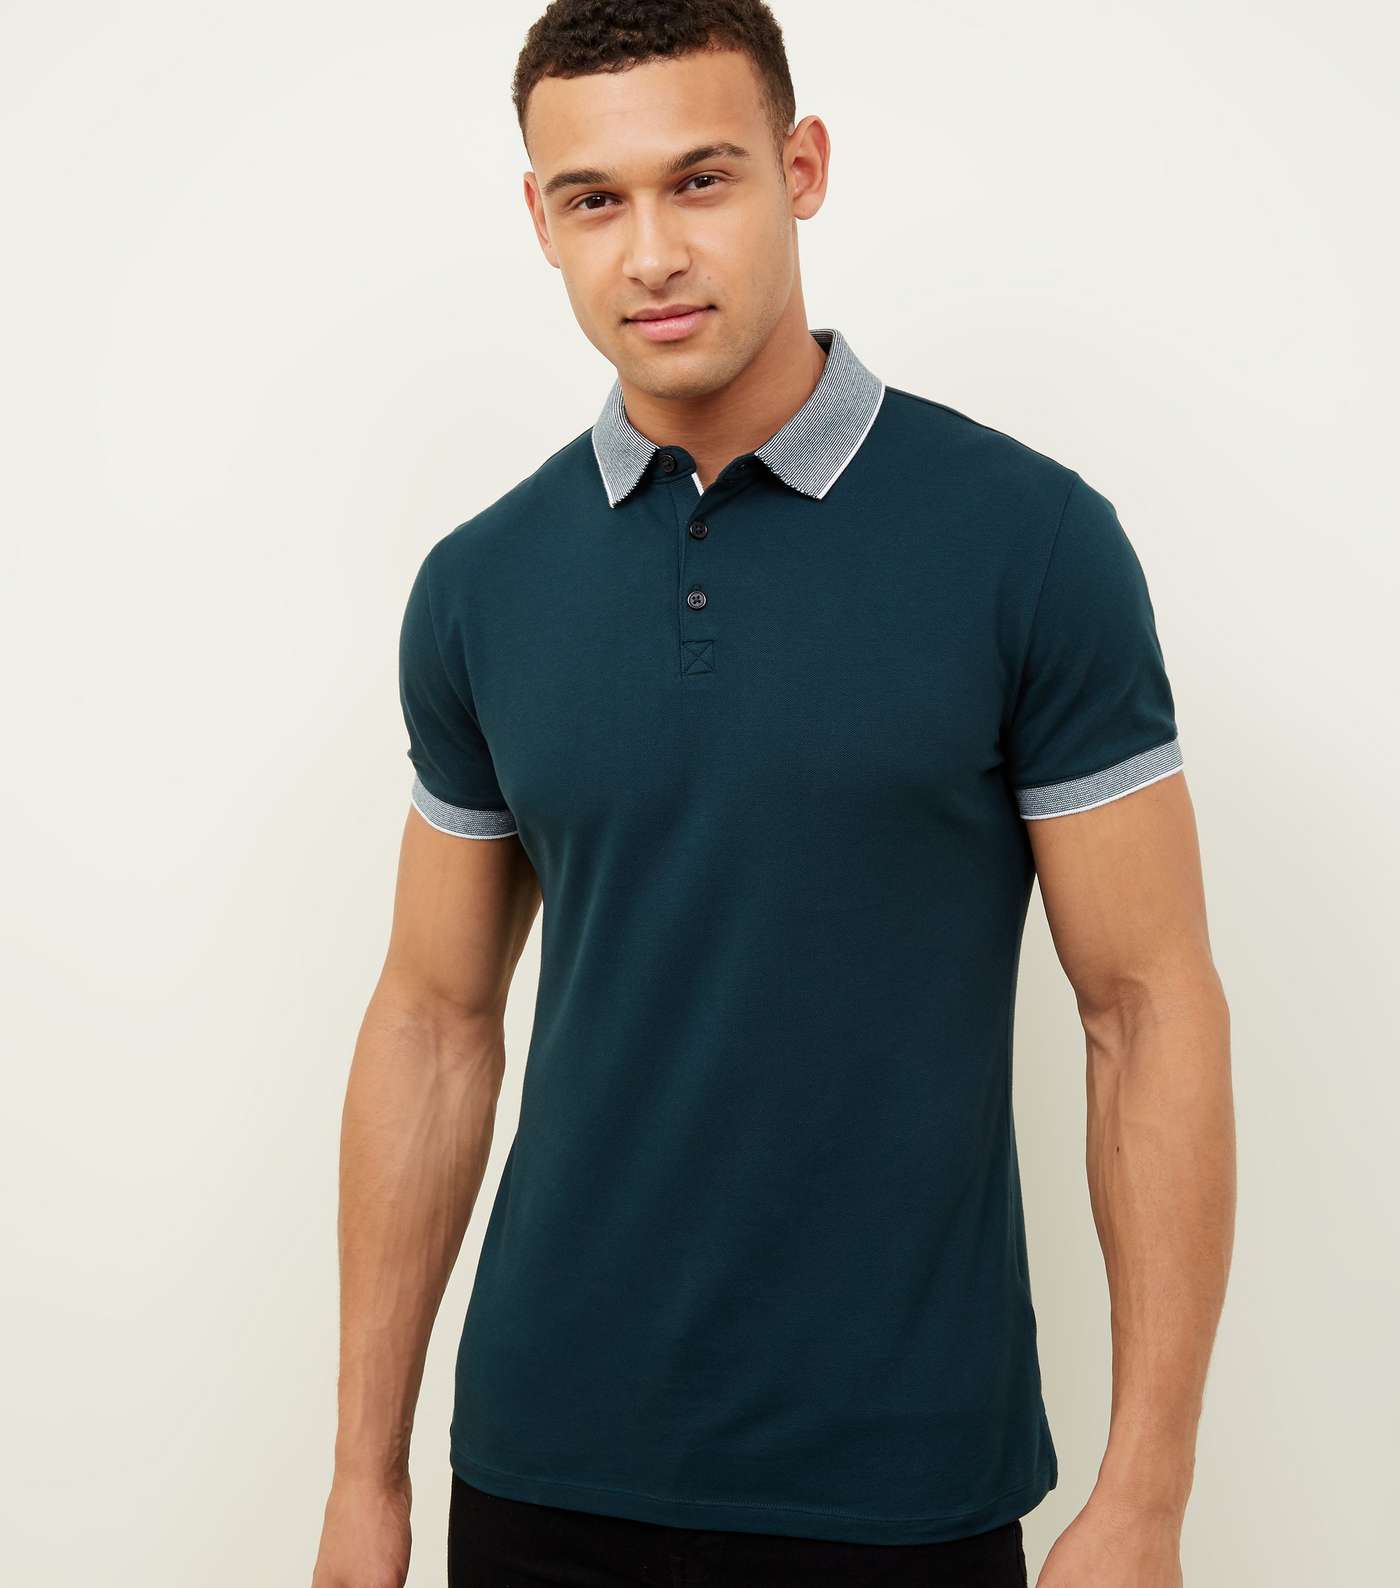 Teal Stripe Collar Muscle Fit Polo Shirt